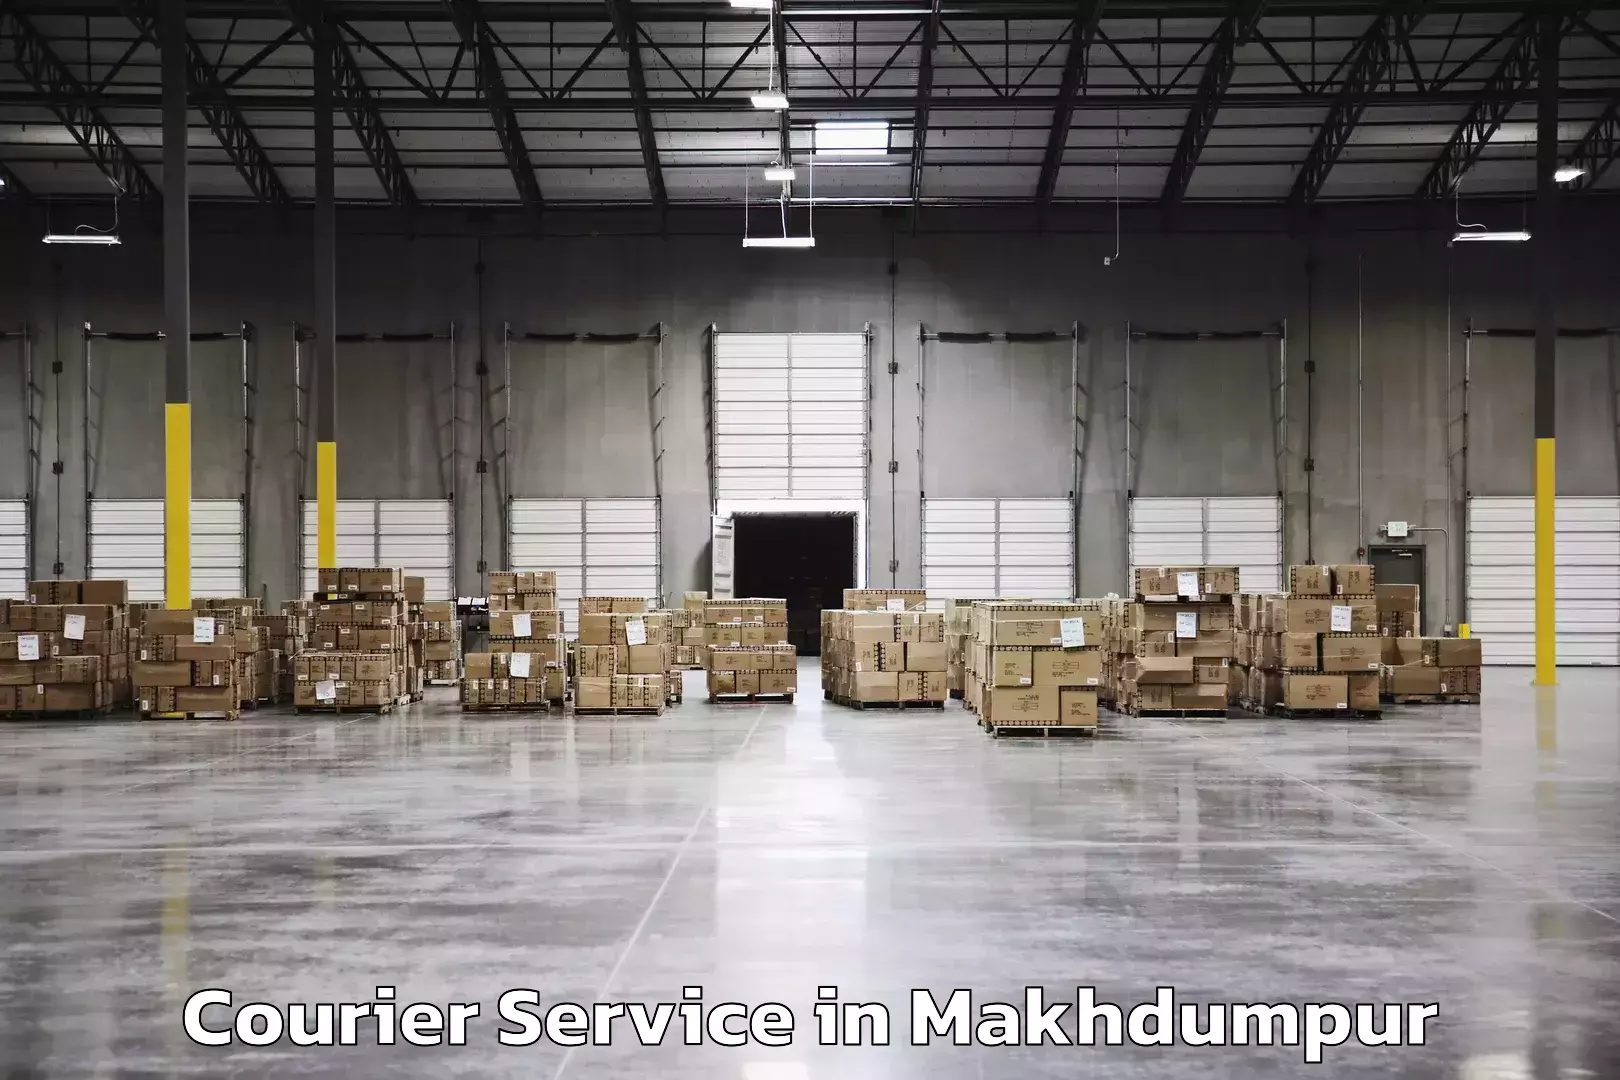 Reliable logistics providers in Makhdumpur